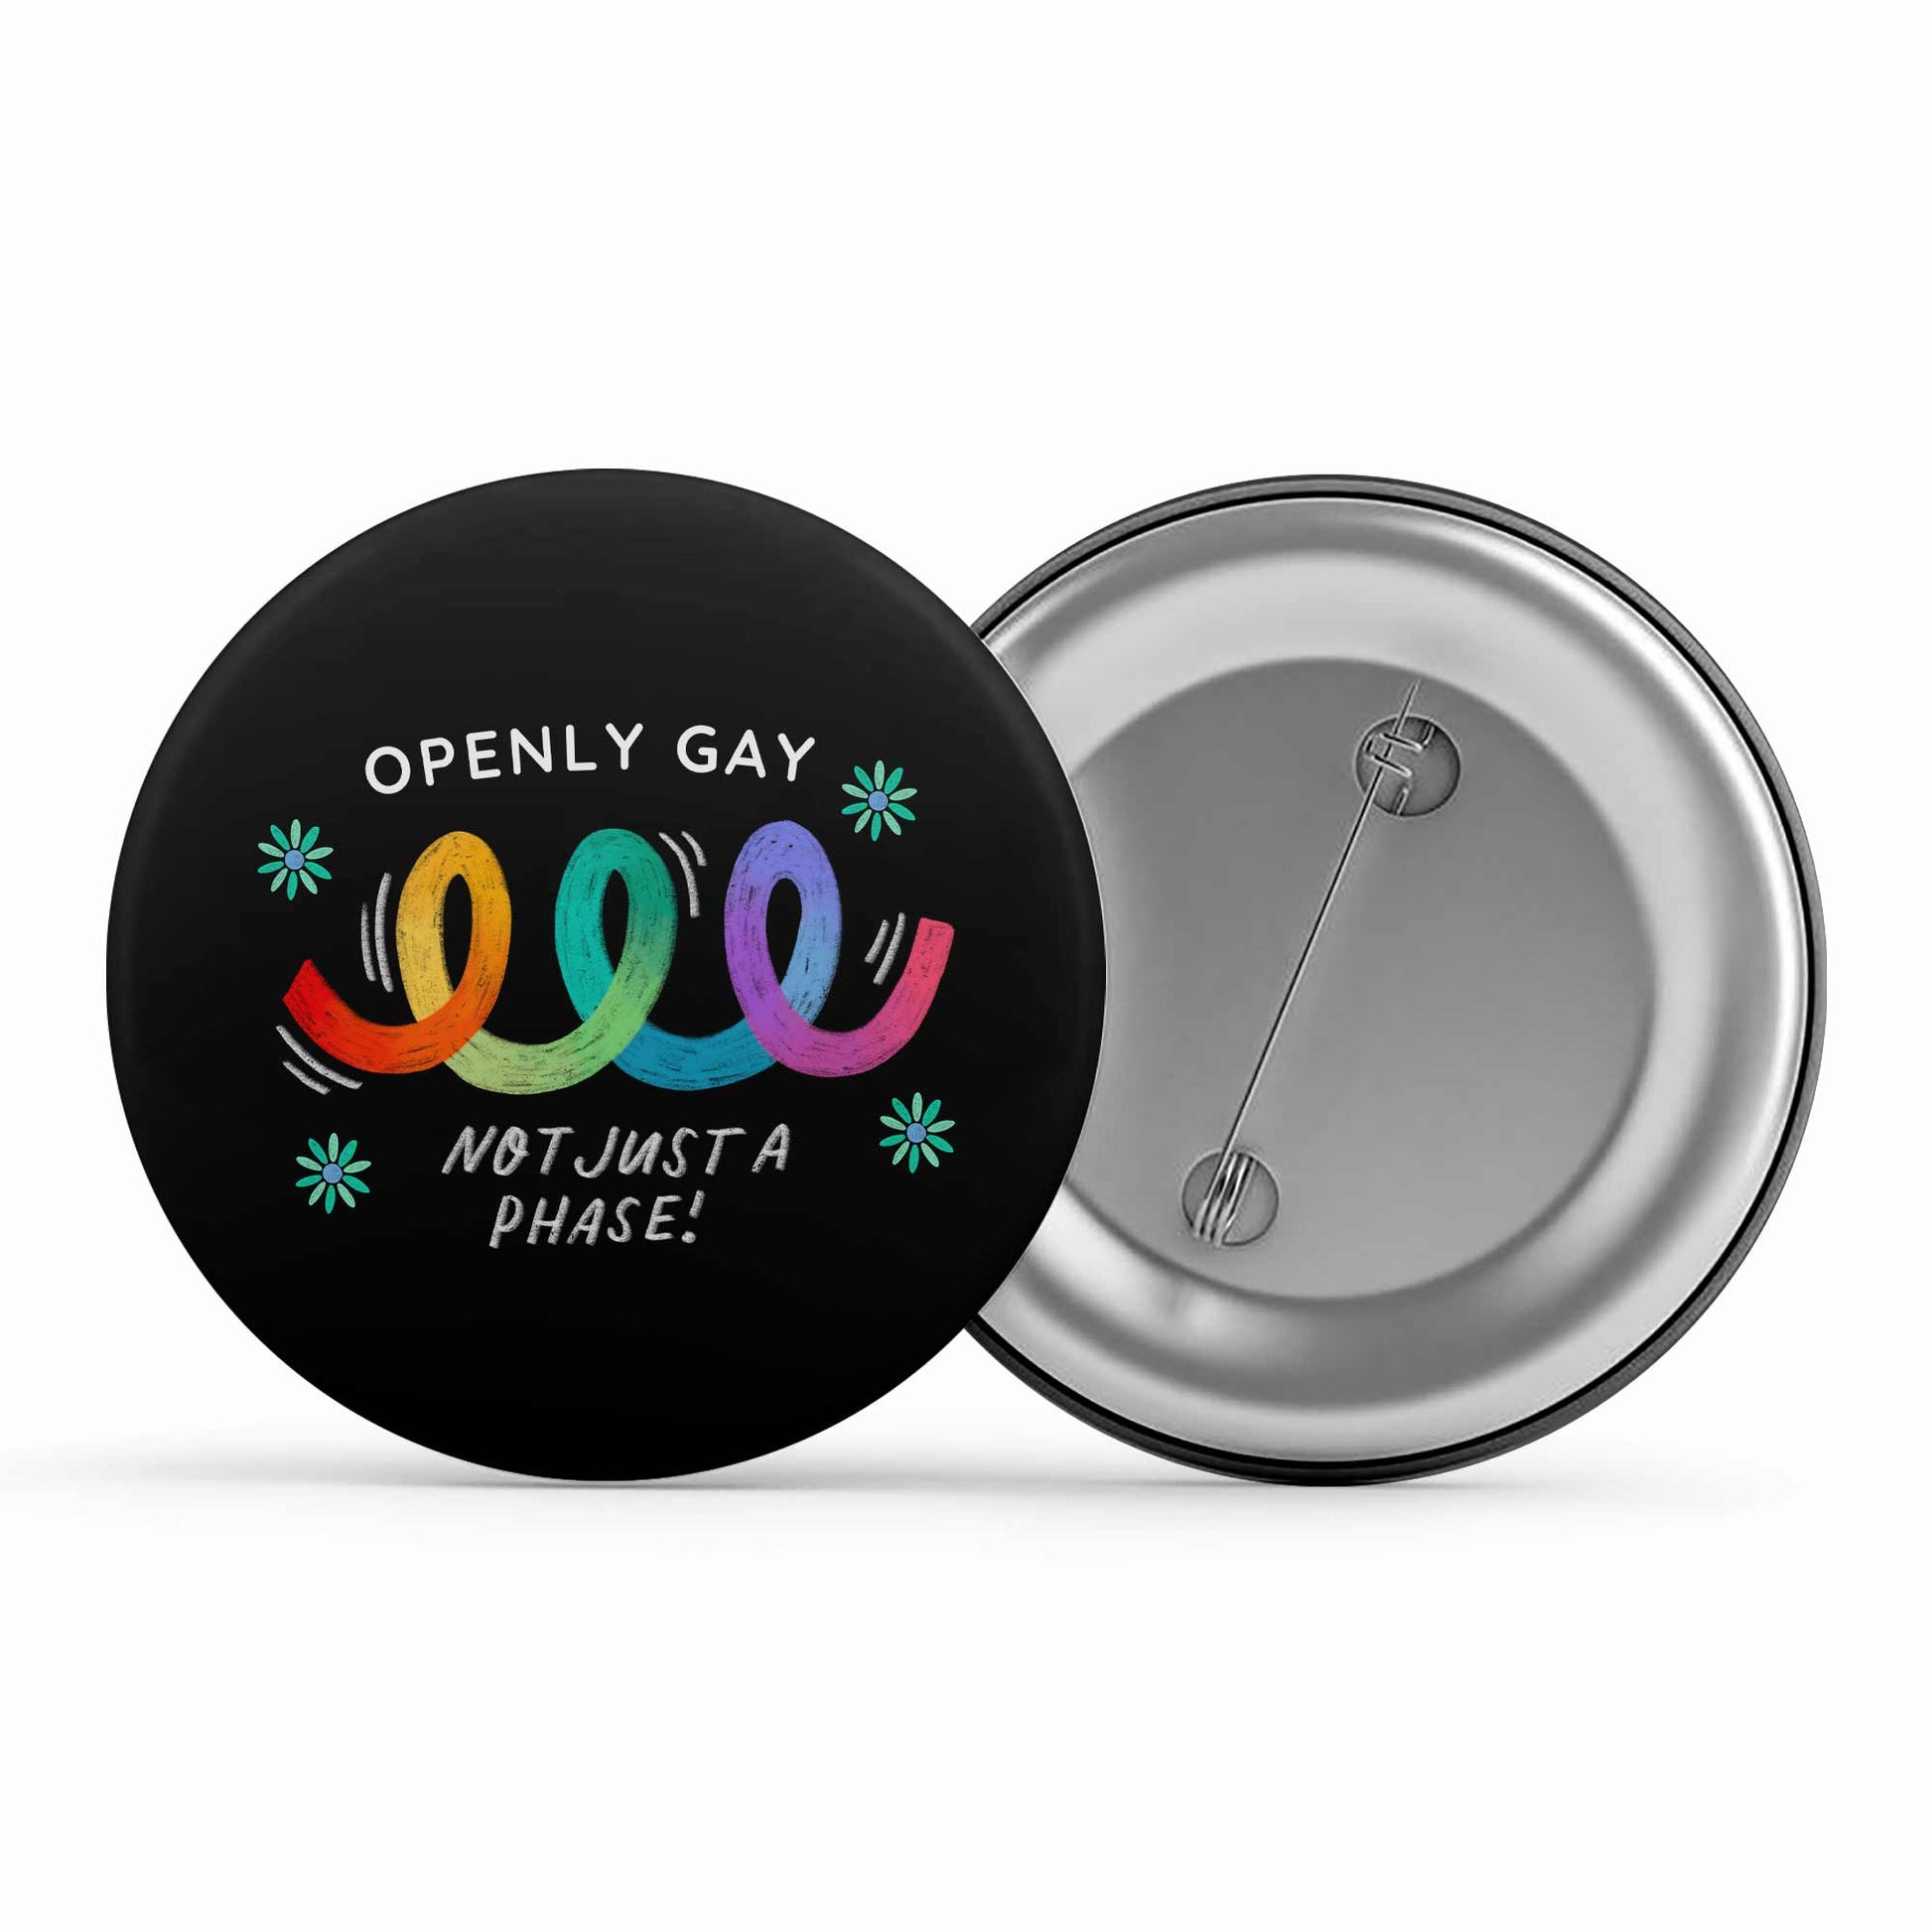 pride openly gay badge pin button printed graphic stylish buy online india the banyan tee tbt men women girls boys unisex  - lgbtqia+